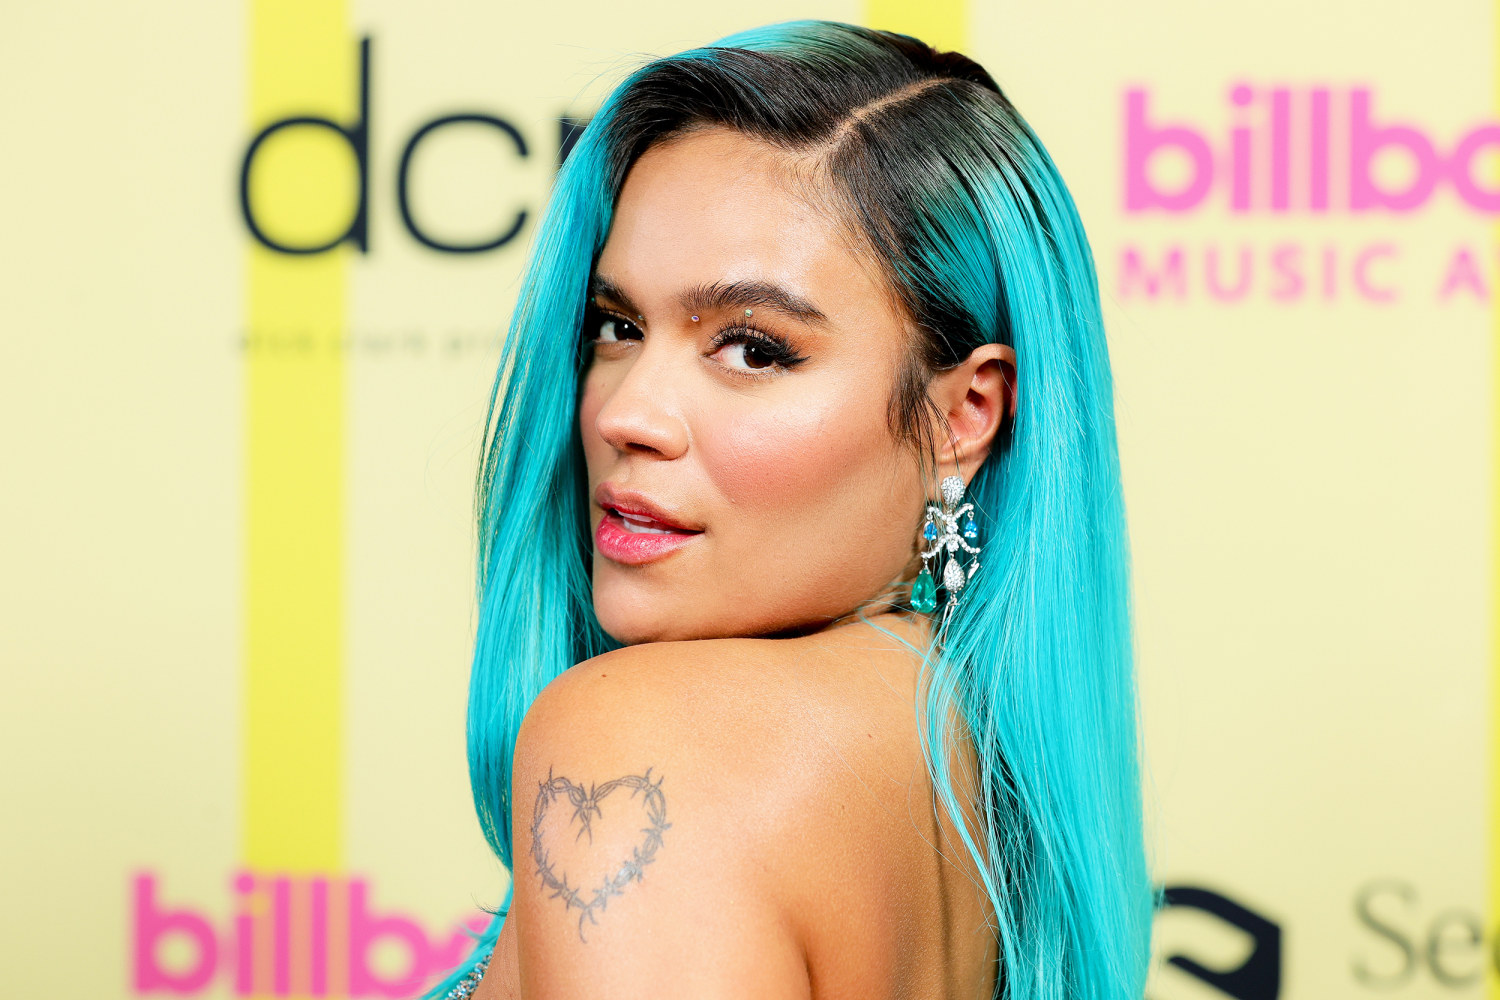 Karol G Reacts to 'Disrespectful' Photo Editing on Her GQ Cover